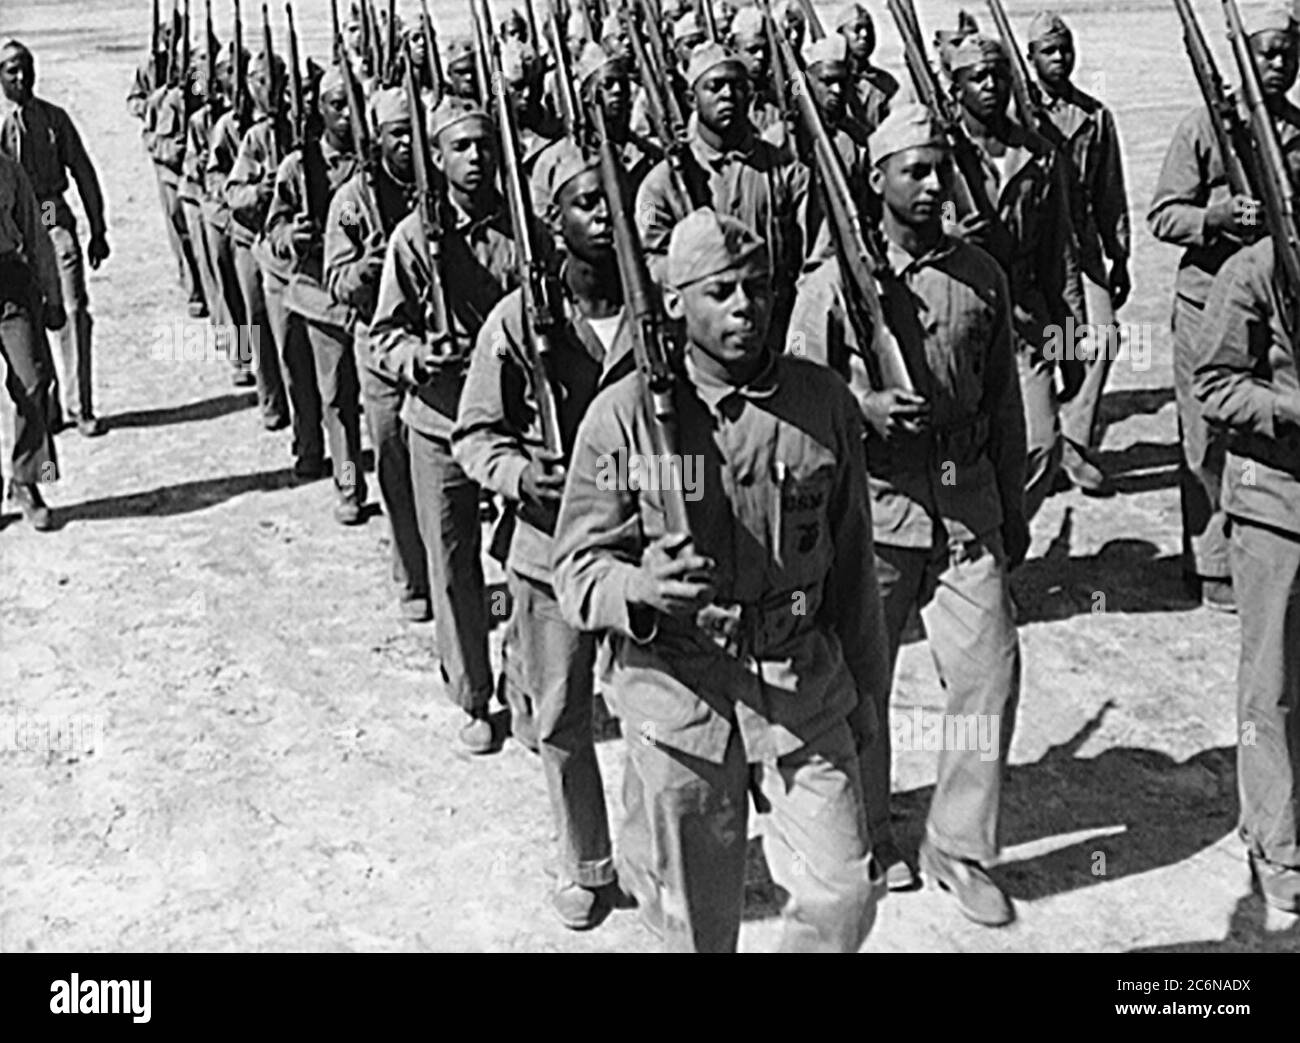 1943-First Class U.S 1942 Marine Corps started enlisting Black Men on June 1